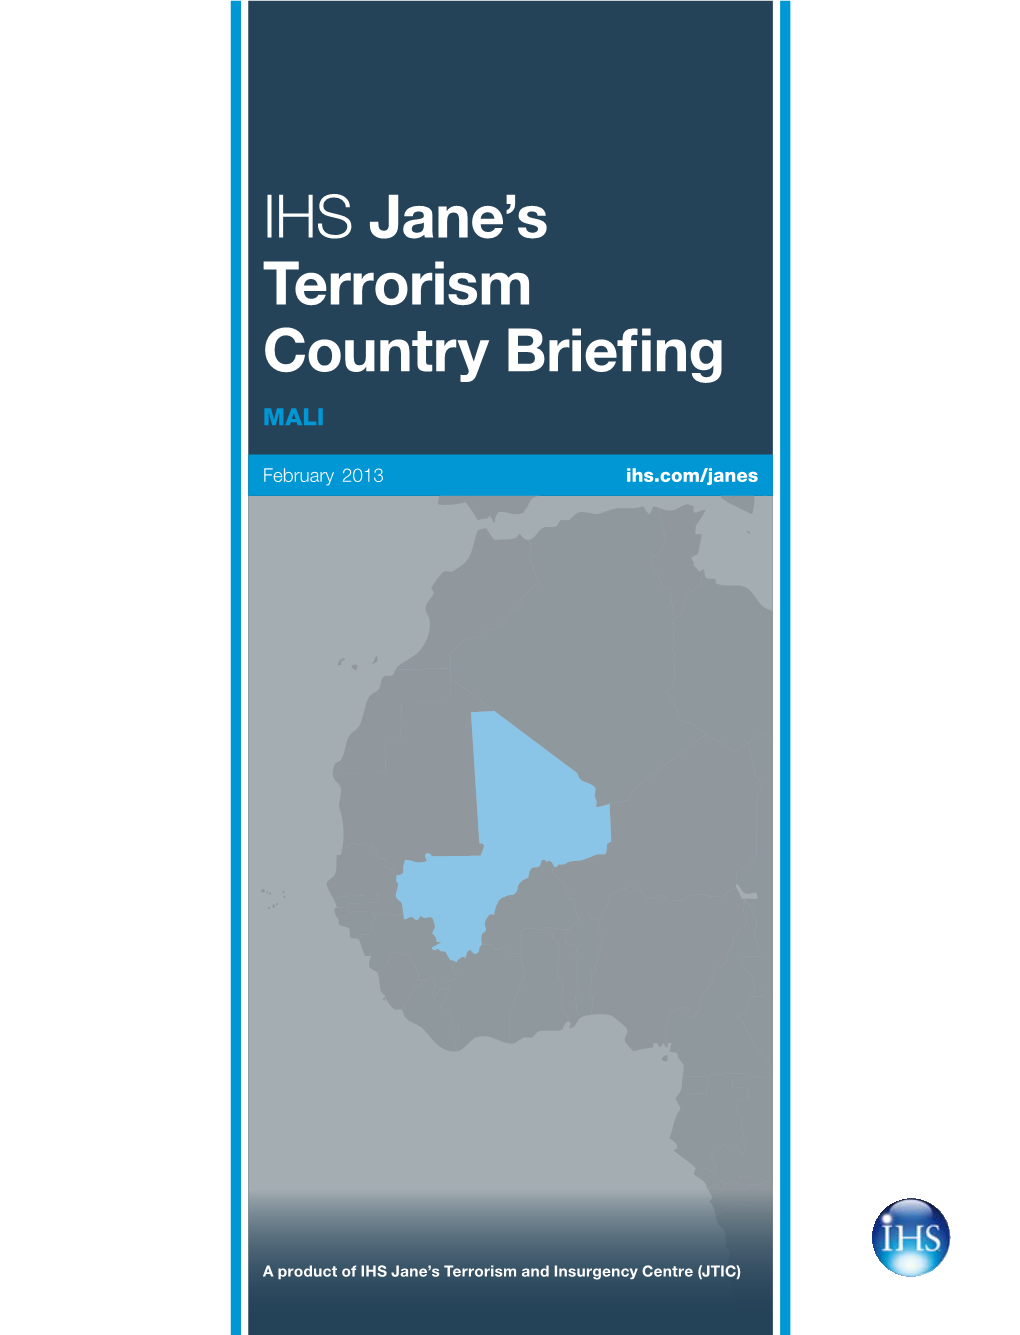 IHS Jane's Terrorism Country Briefing